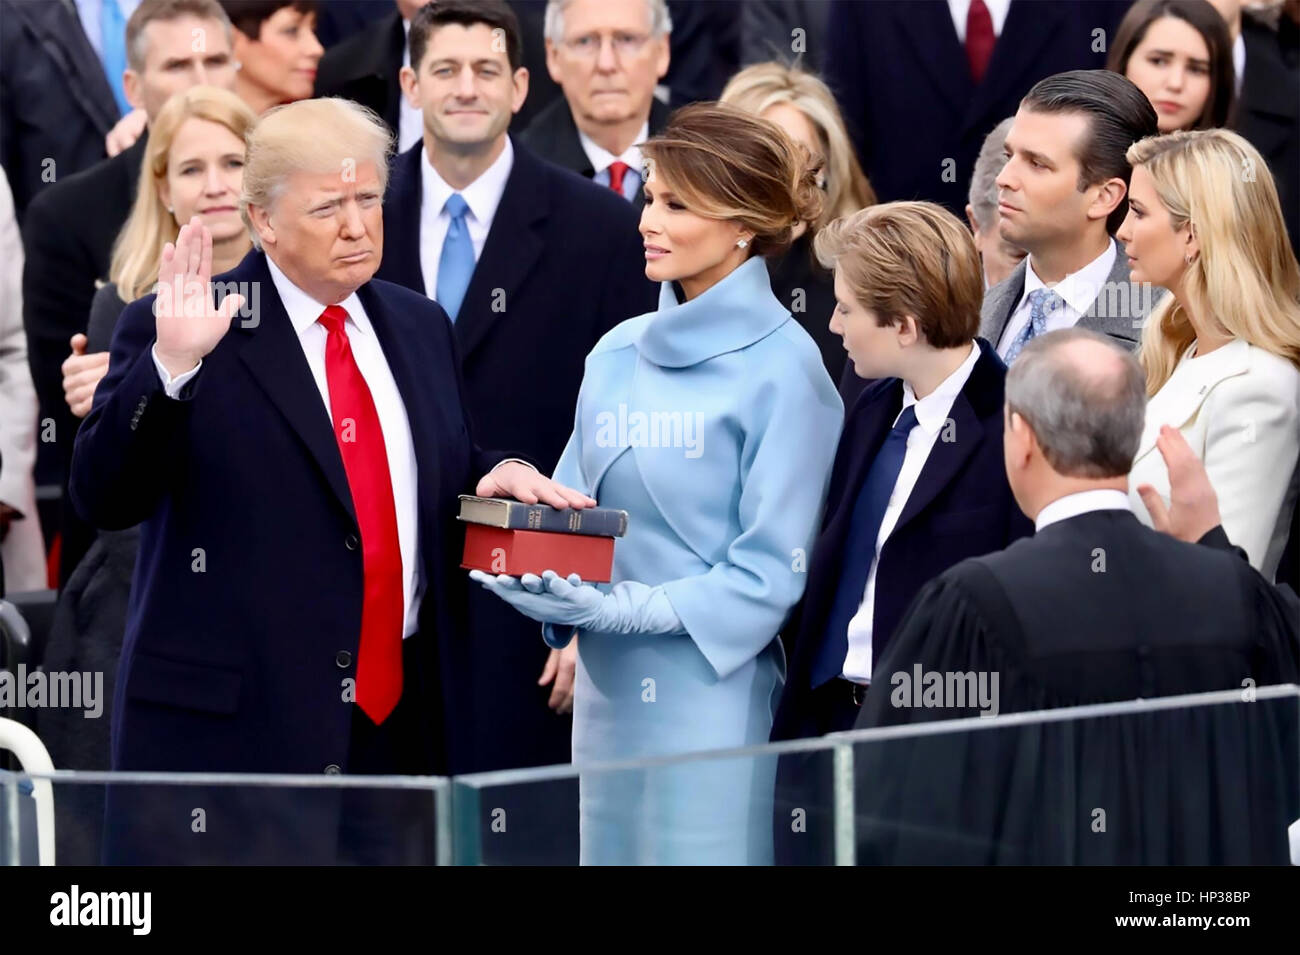 DONALD TRUMP is sworn in as 45th President of the United States on 20 January 2017 with his 3rd wife Melania holding the Bible. Photo: Pete Souza/White House Stock Photo